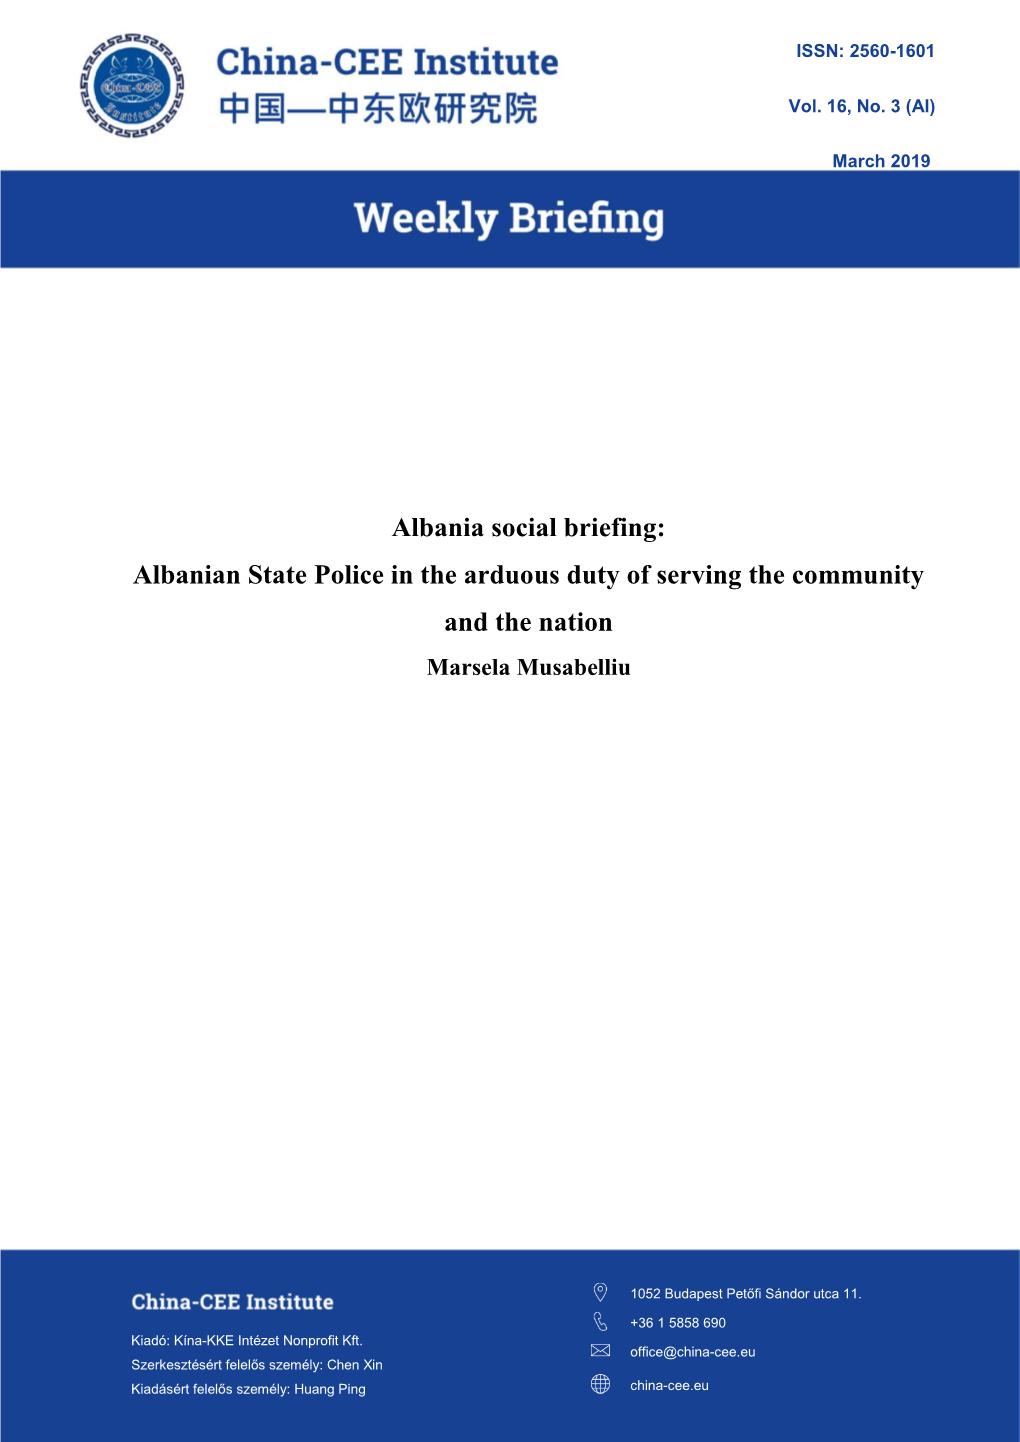 Albania Social Briefing: Albanian State Police in the Arduous Duty of Serving the Community and the Nation Marsela Musabelliu